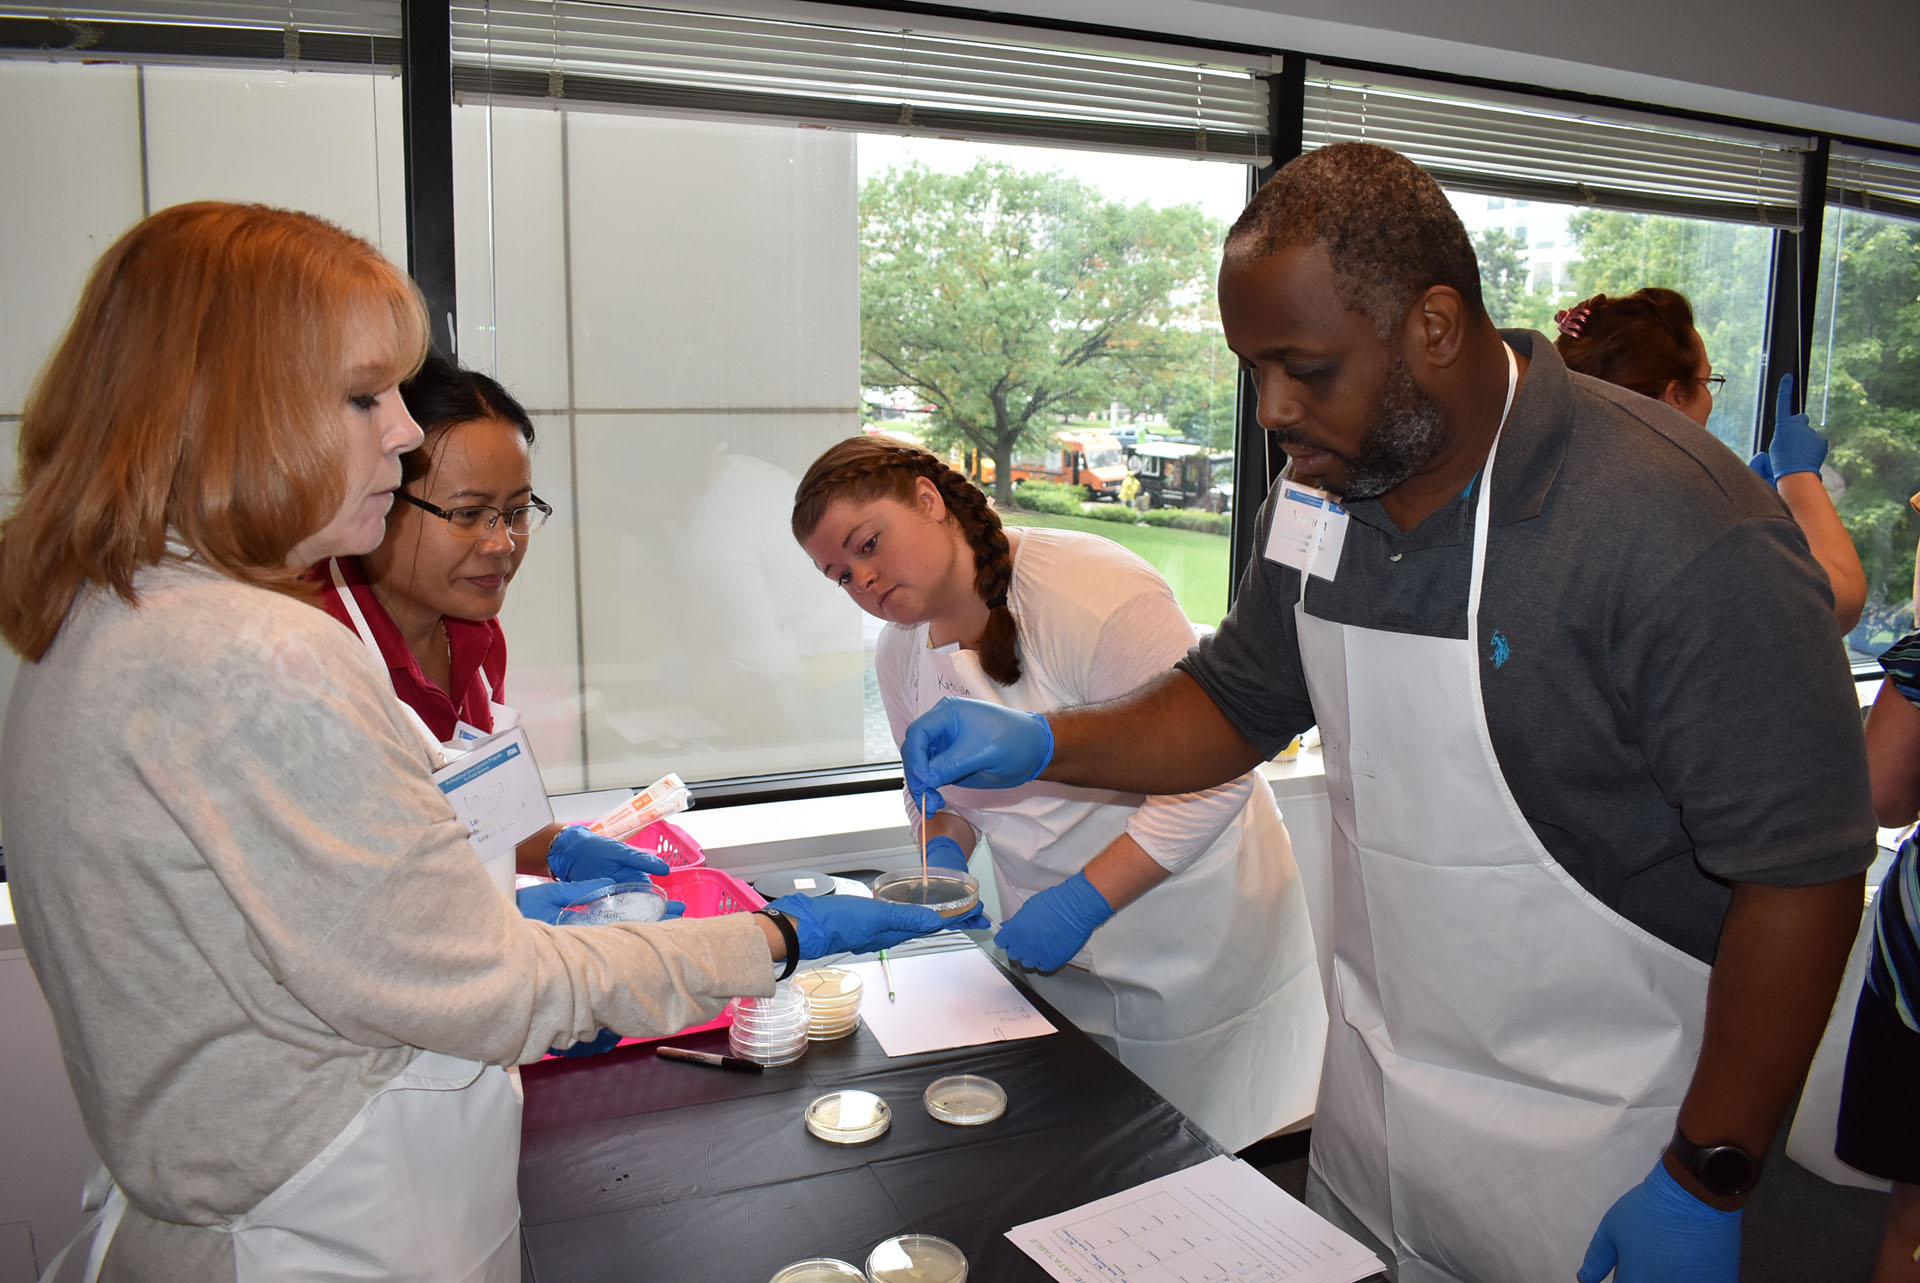 Teachers participating in a lab